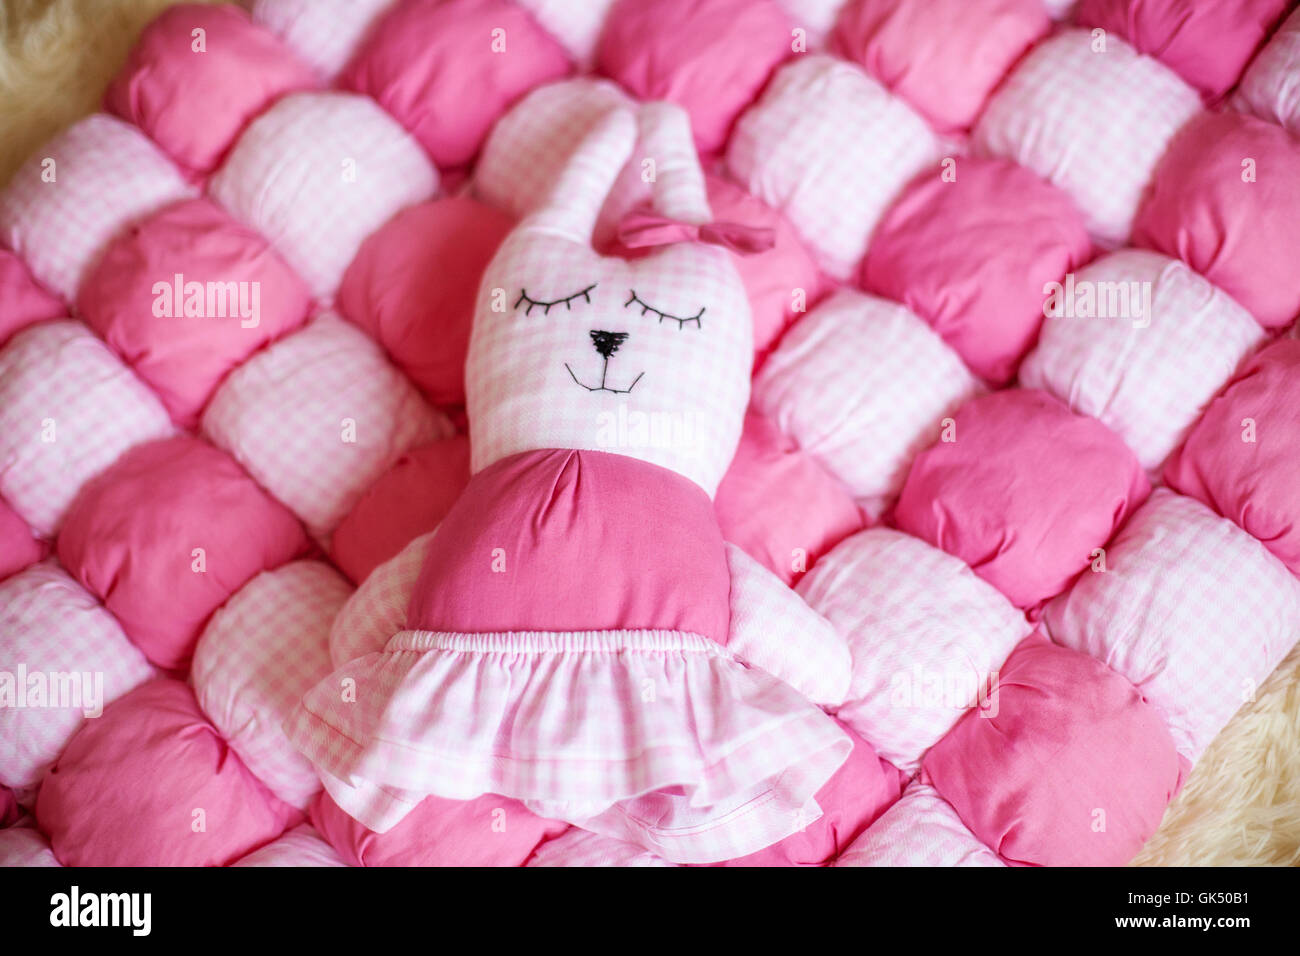 Cute little doll on pink blanket. Pregnancy concept Stock Photo